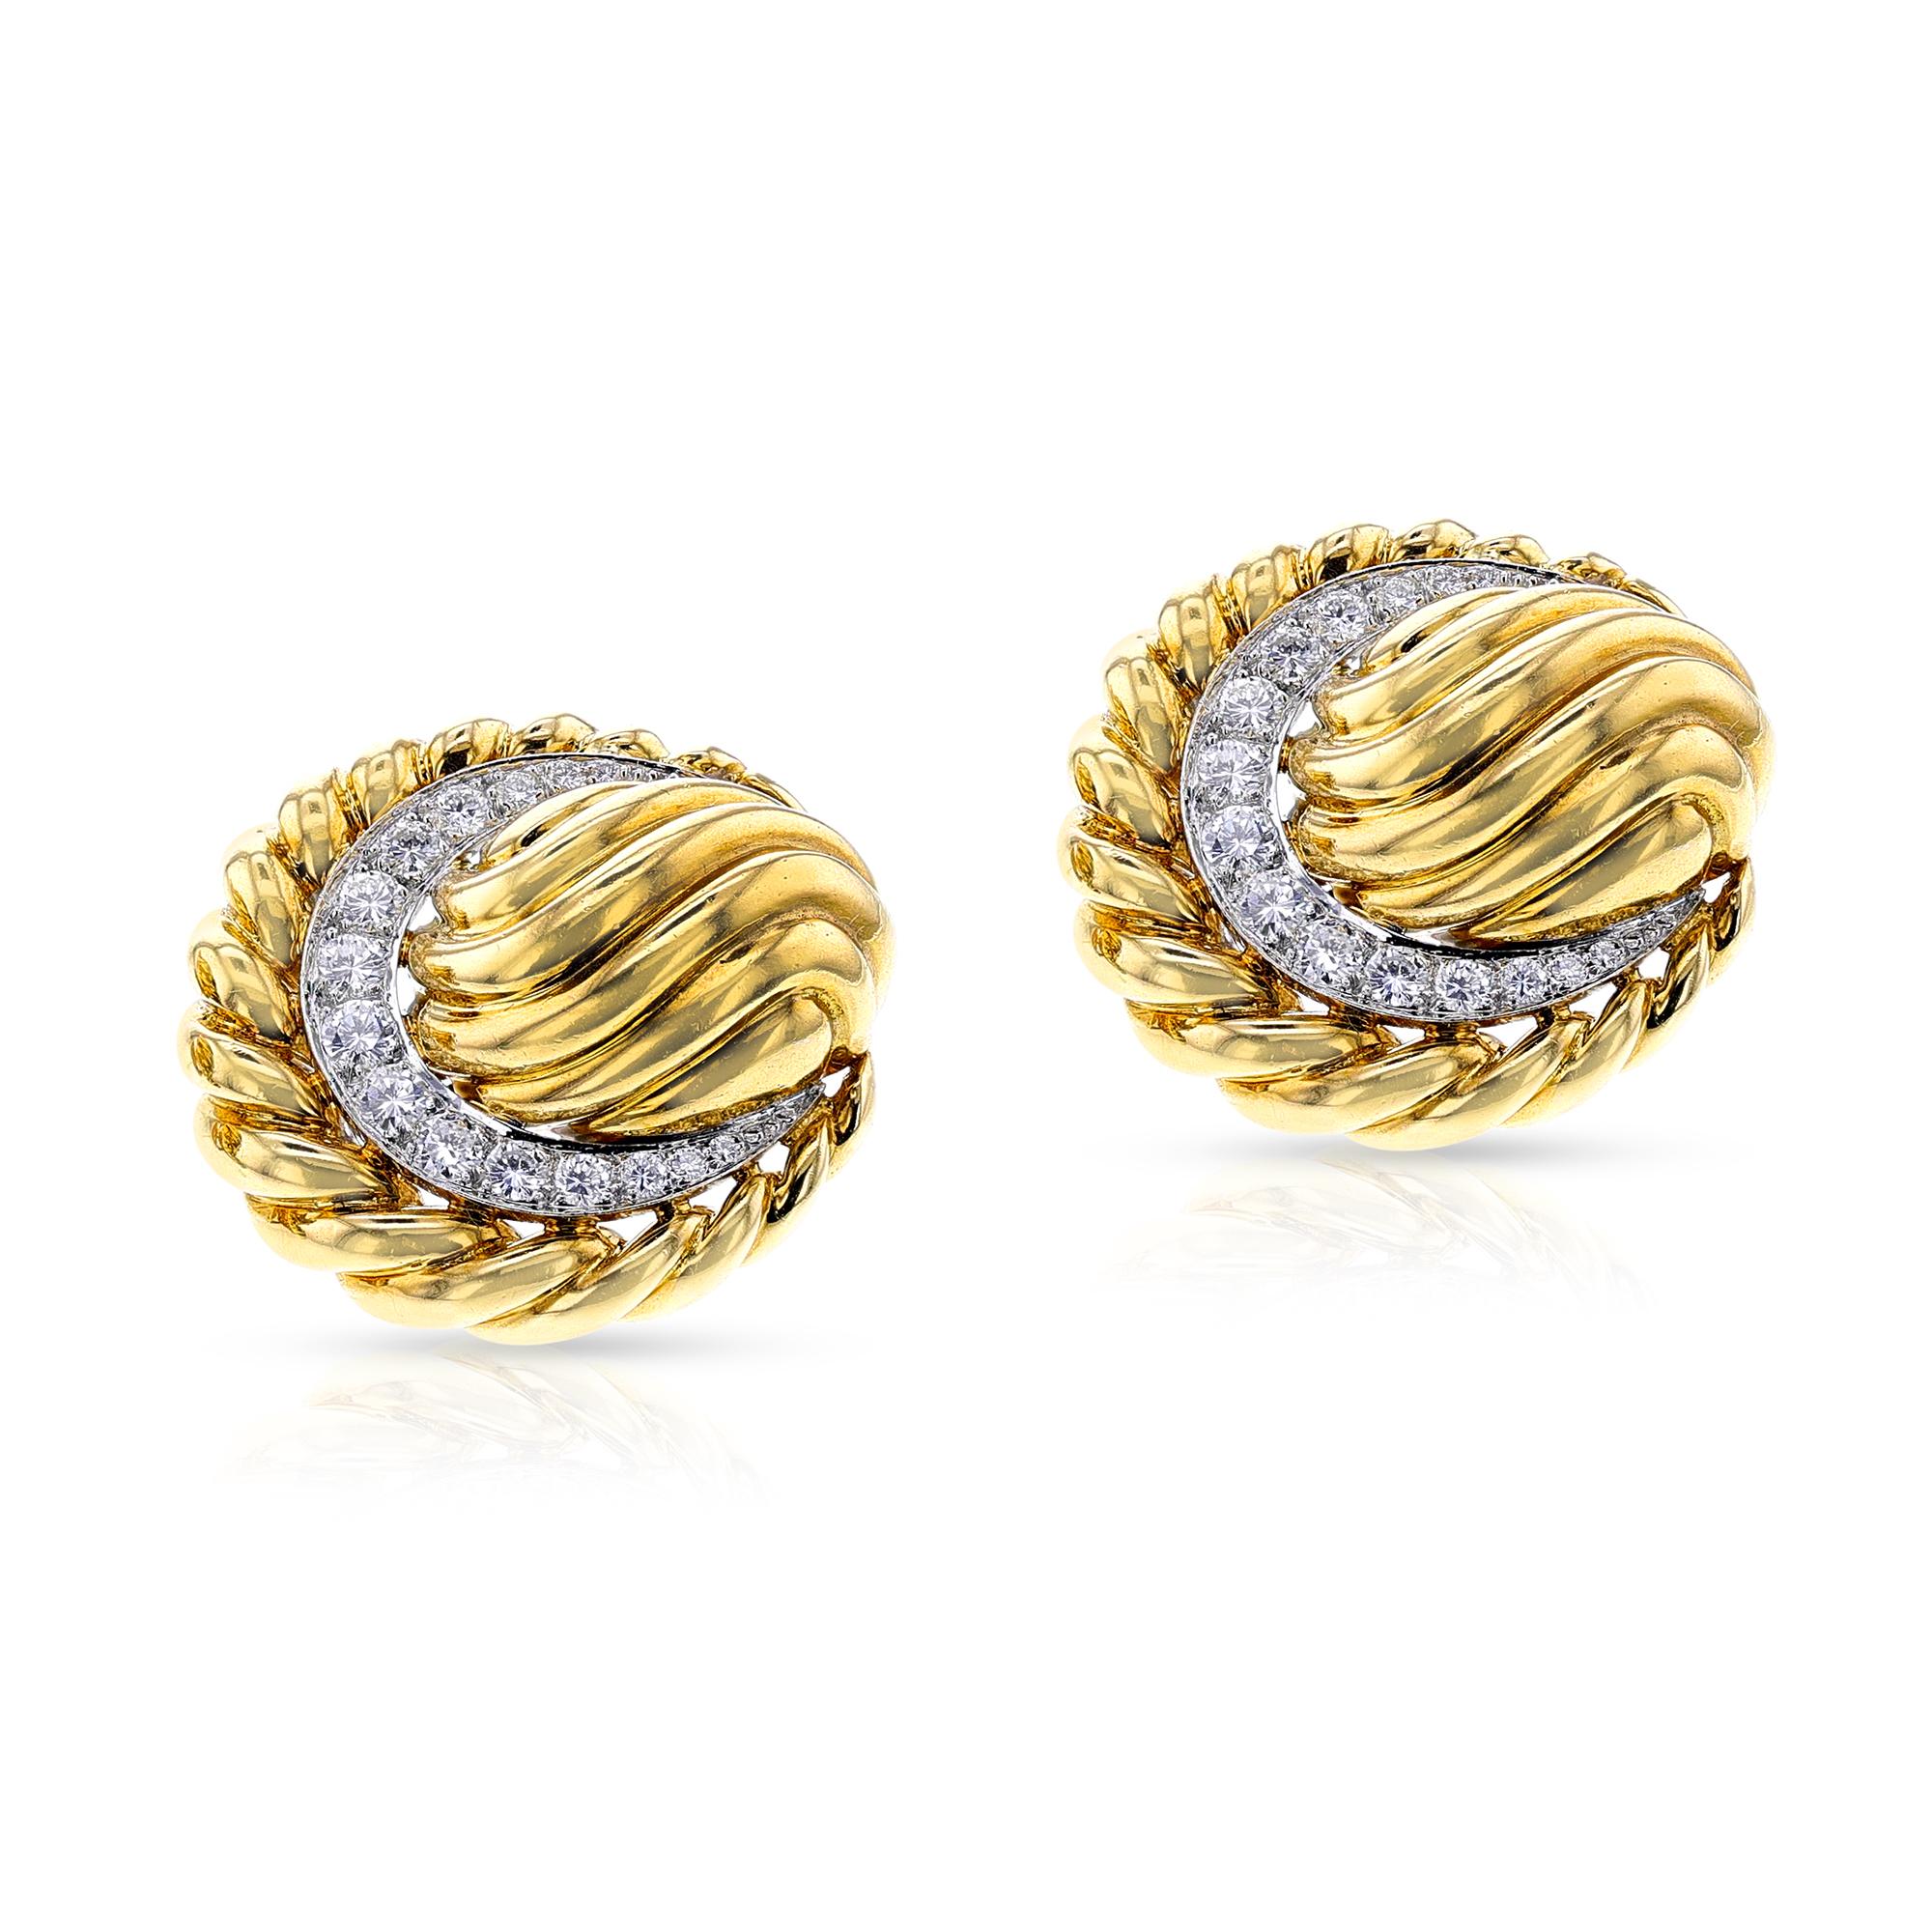 A stunning pair of David Webb Textured Gold and Diamond Clip-on Earrings made in 18k yellow Gold. The total weight of the earring is 37.10 grams. The dimensions are 1.2